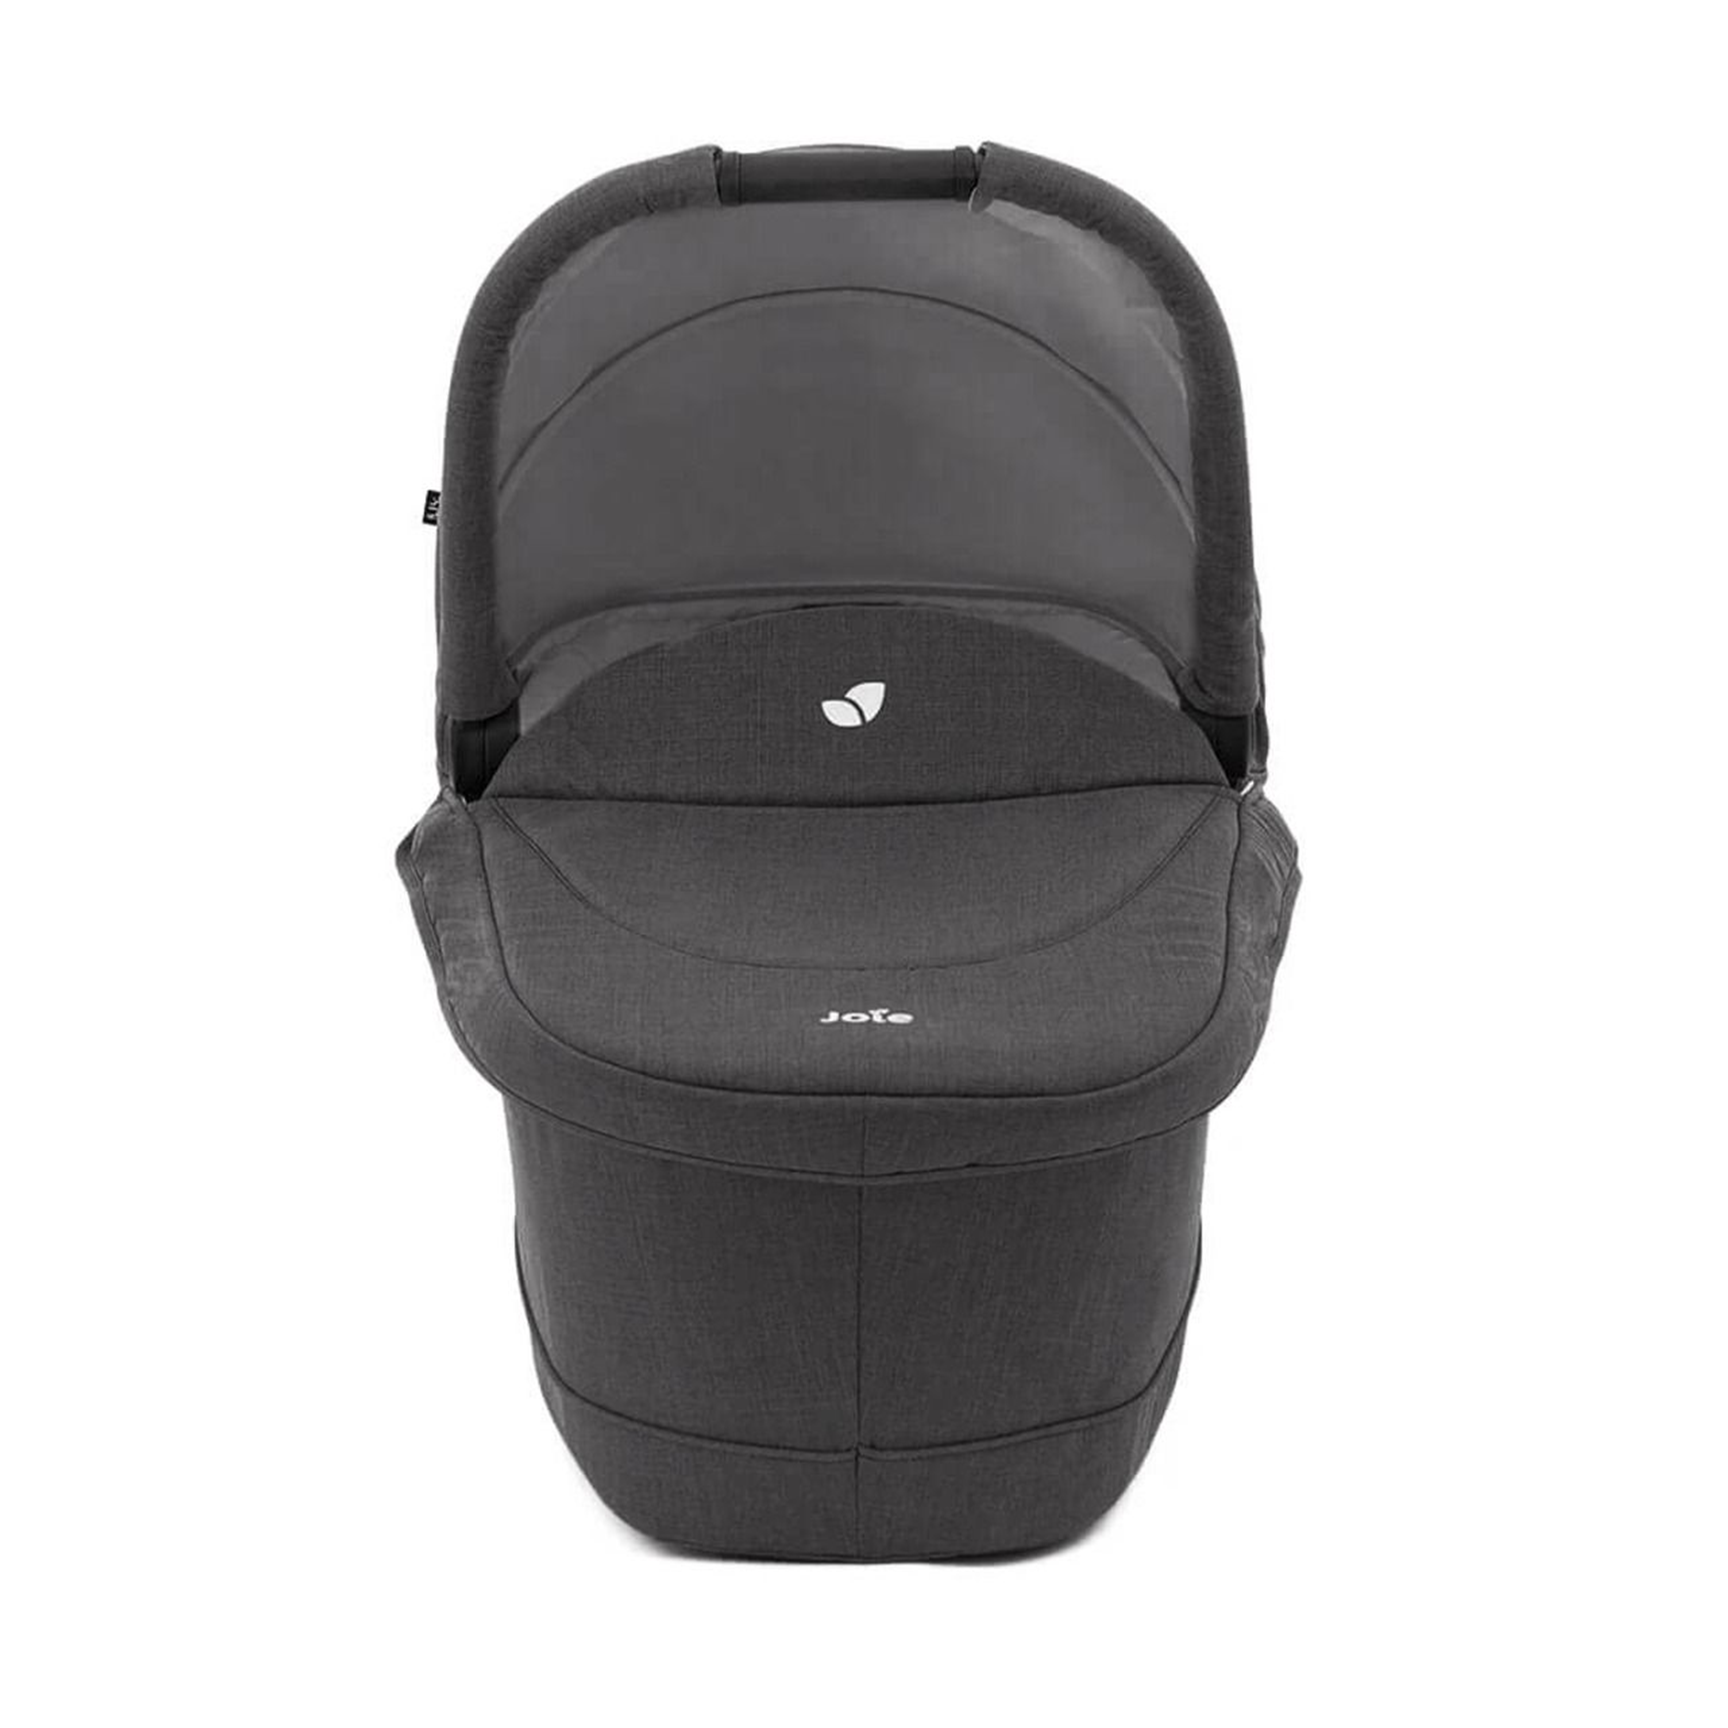 Joie Ramble XL Carrycot in Shale Chassis & Carrycots A1219PDSHA000 5056080615233